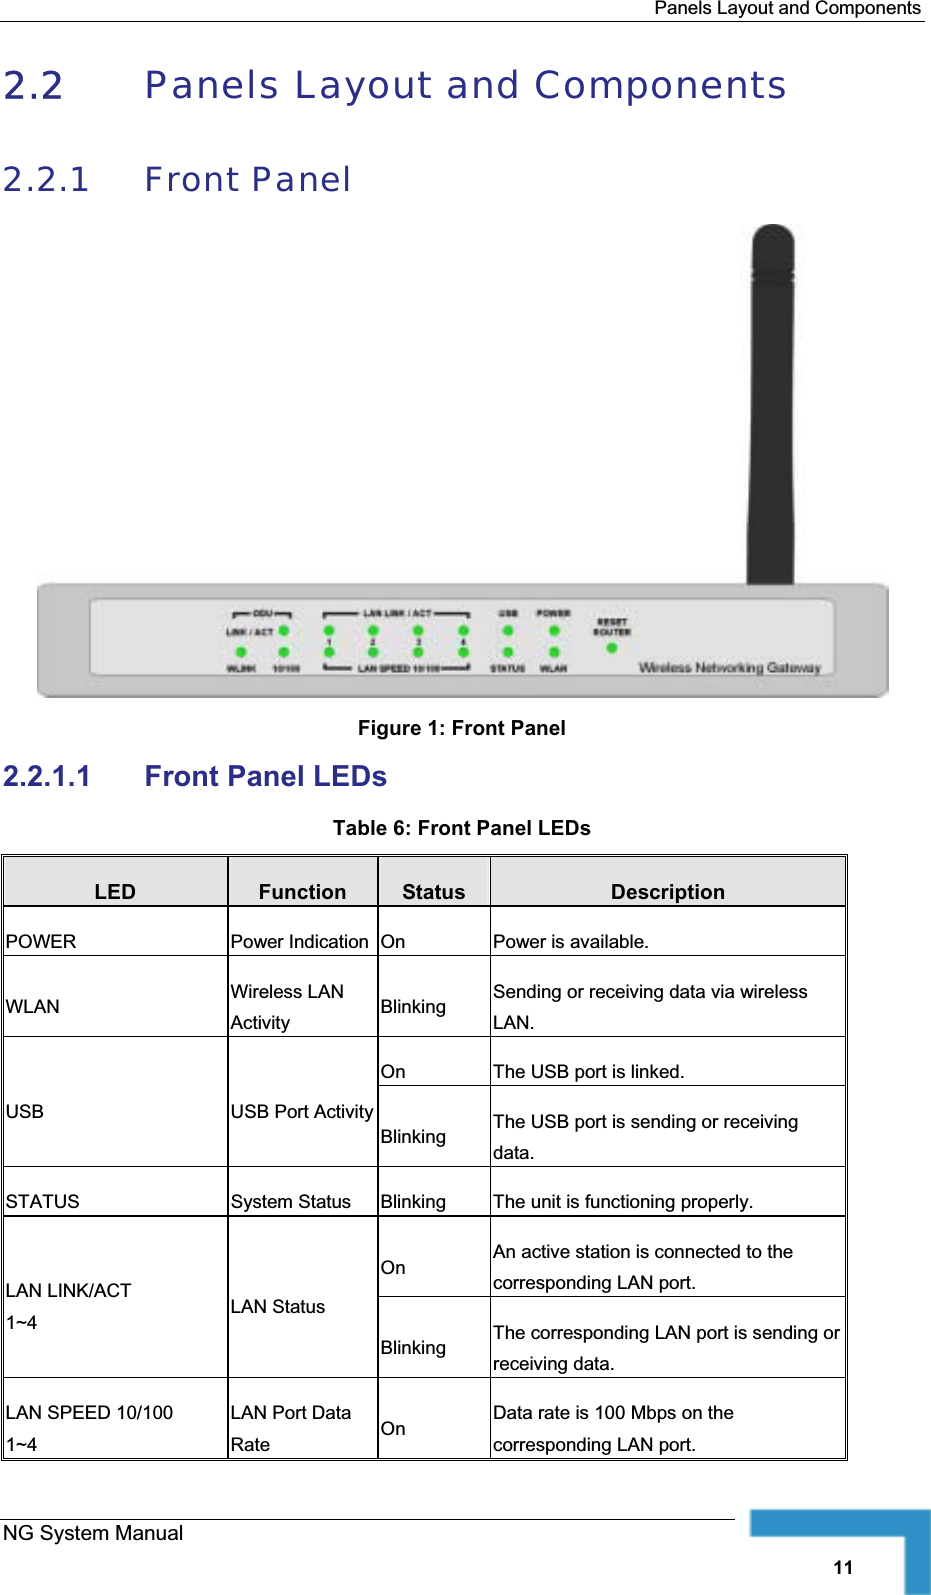 Panels Layout and Components2.2 Panels Layout and Components 2.2.1 Front PanelFigure 1: Front Panel 2.2.1.1 Front Panel LEDsTable 6: Front Panel LEDs LED Function Status DescriptionPOWER Power Indication On Power is available.WLAN Wireless LAN Activity Blinking Sending or receiving data via wirelessLAN.On The USB port is linked.USB USB Port ActivityBlinking The USB port is sending or receivingdata.STATUS System Status Blinking The unit is functioning properly.On An active station is connected to the corresponding LAN port. LAN LINK/ACT1~4 LAN Status Blinking The corresponding LAN port is sending or receiving data.LAN SPEED 10/1001~4LAN Port Data Rate On Data rate is 100 Mbps on thecorresponding LAN port. NG System Manual11